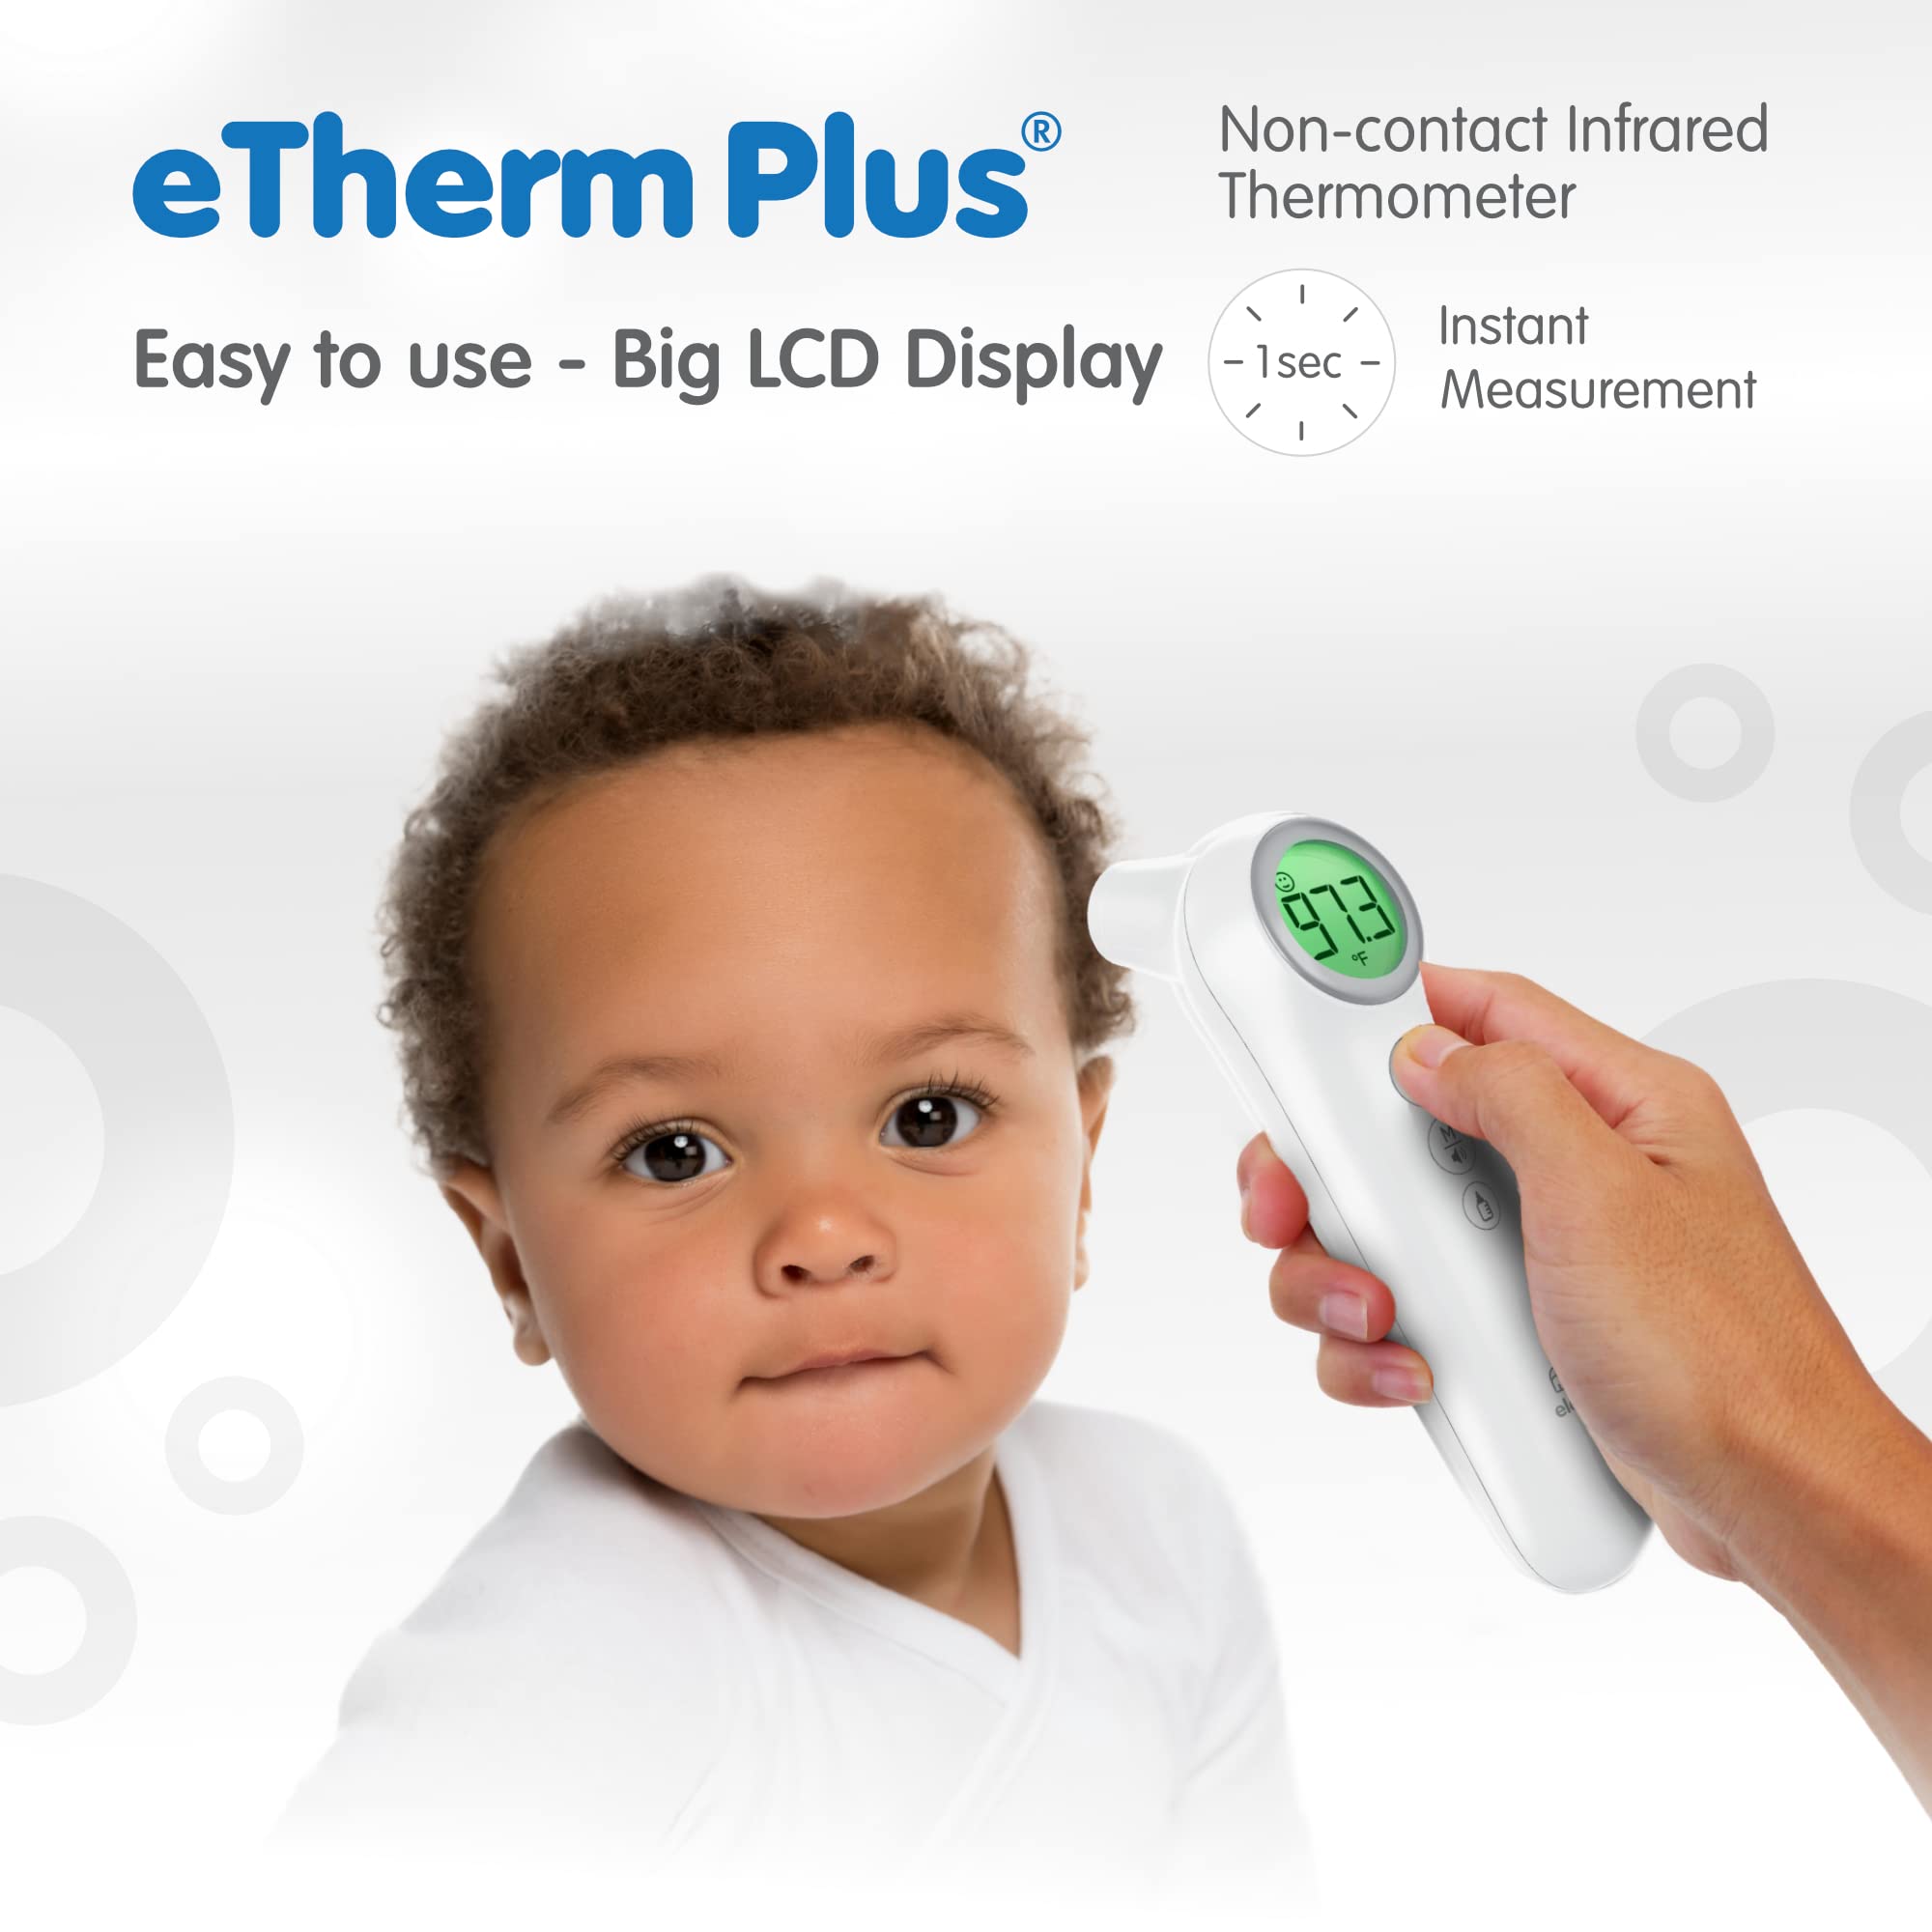 Elepho eTherm Plus Non-Contact Infrared Forehead Thermometer for All The Family; Babies to Adults – Accurate & Fast Readings in 1 Second. Large LCD Display…